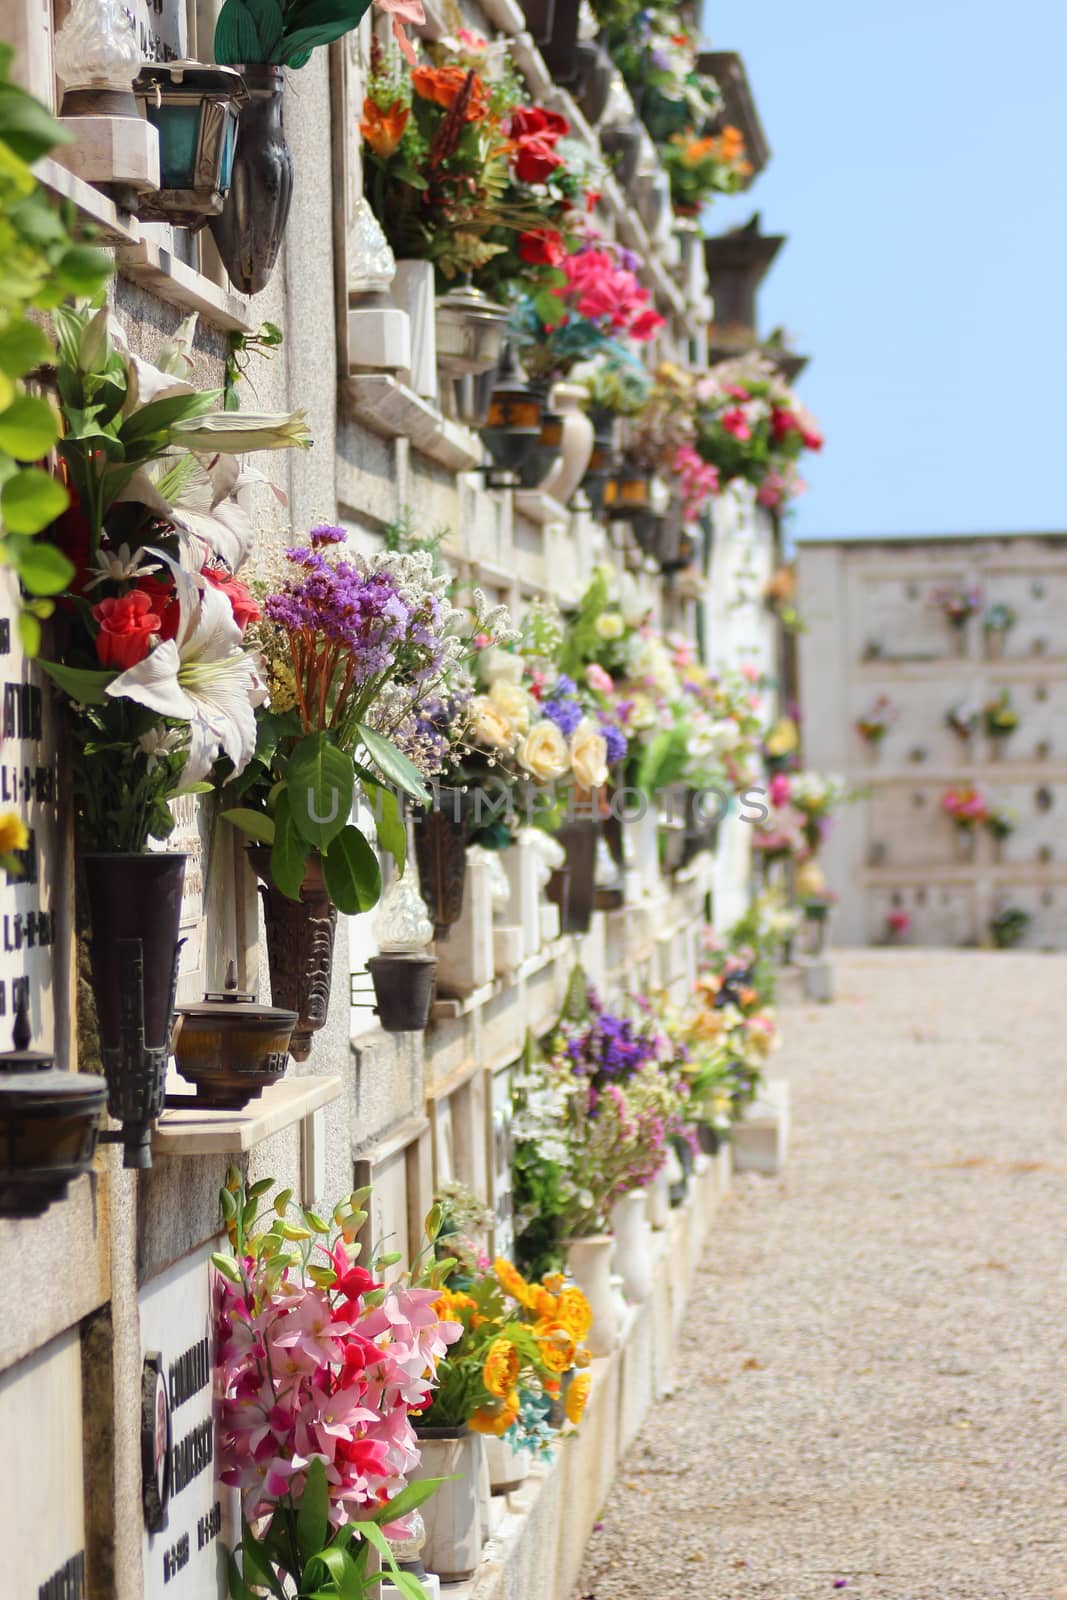 Cemetery for urns in italian village with flowers